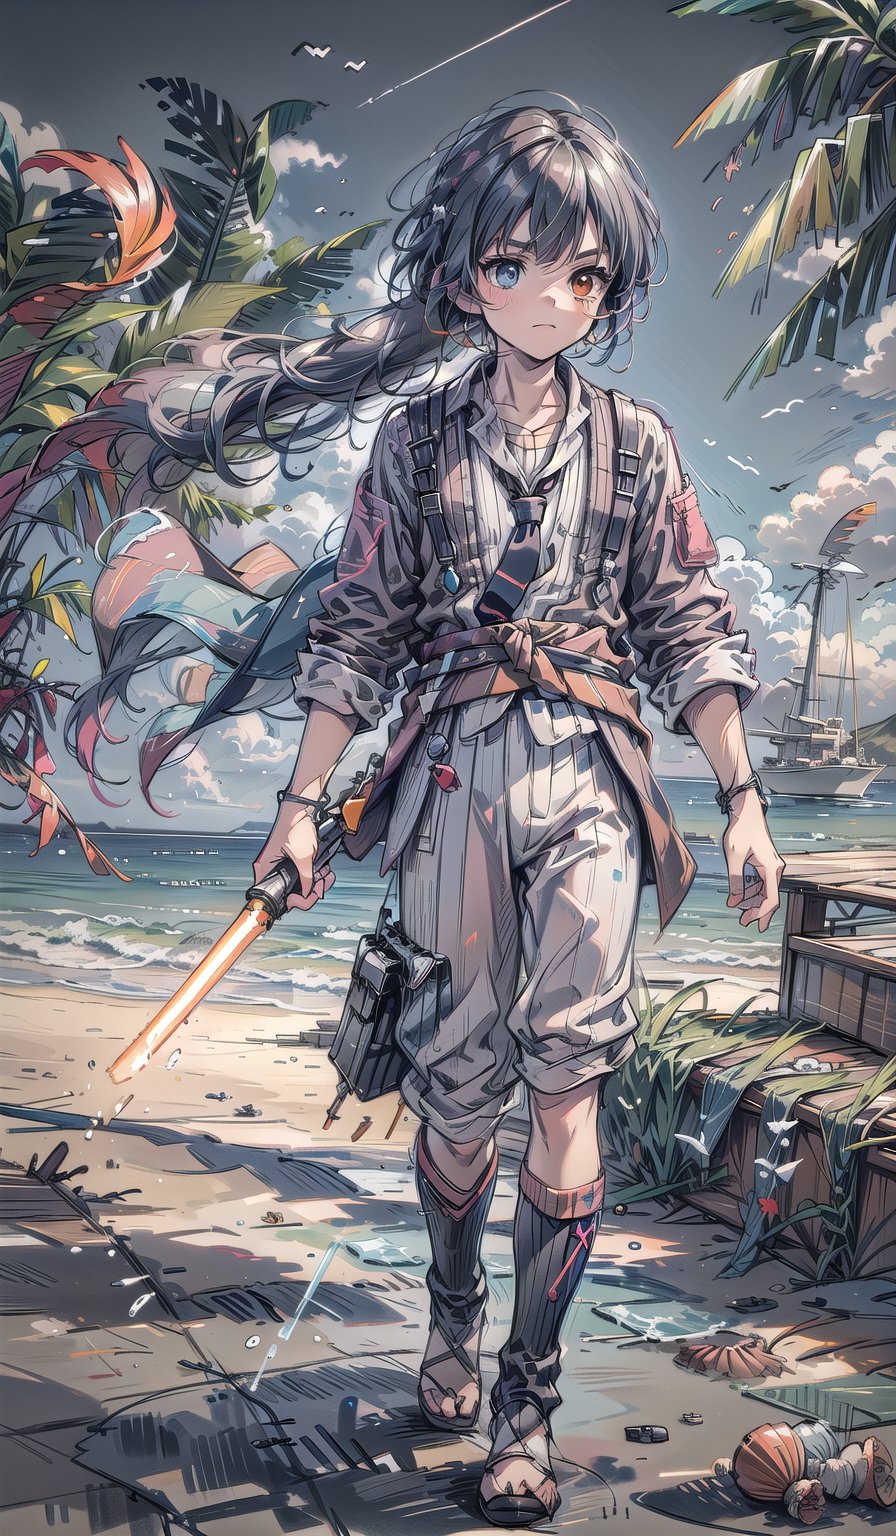 a sketch of a guy jogging on the beach, 18 years old, holding jar of water, seaweed and seashells, looking far at a distance, long hair, heterochromia eyes, teenager ocean breeze, walking, sketchy, Sketch, wielding a lightsaber, x-wing and tie-fighters in the sky